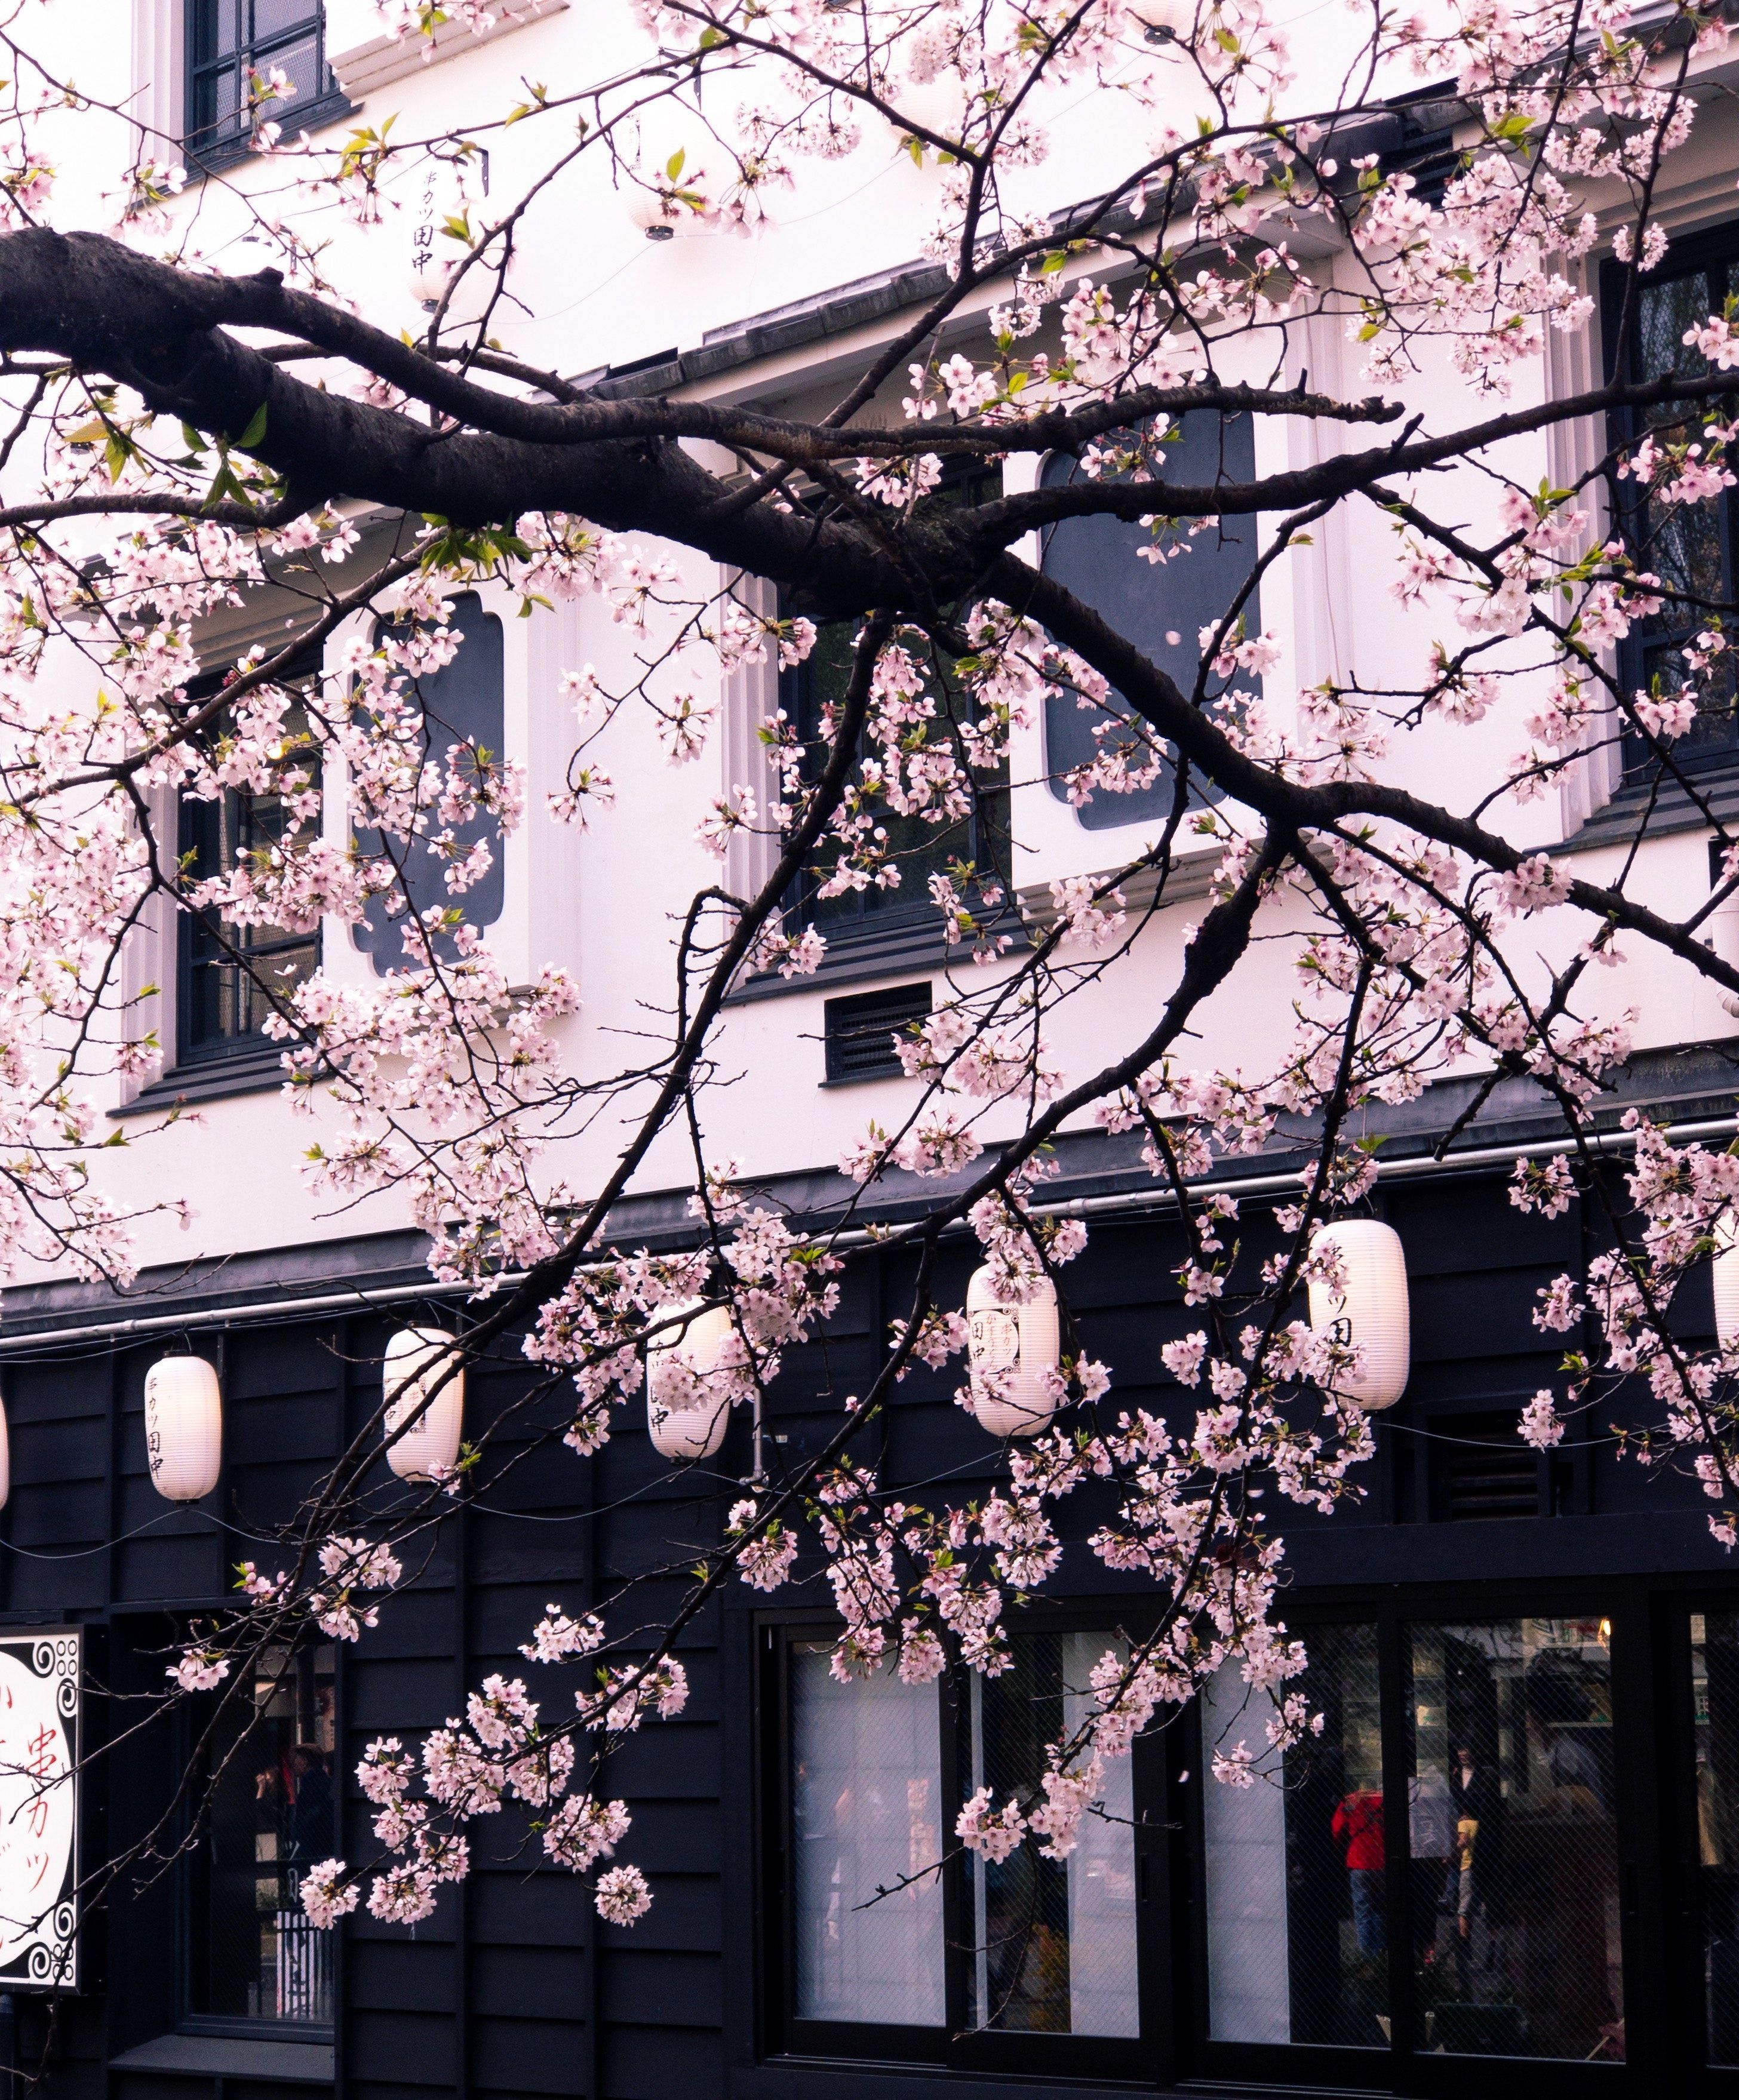 Cherry blossoms in bloom in front of a building - Cherry blossom